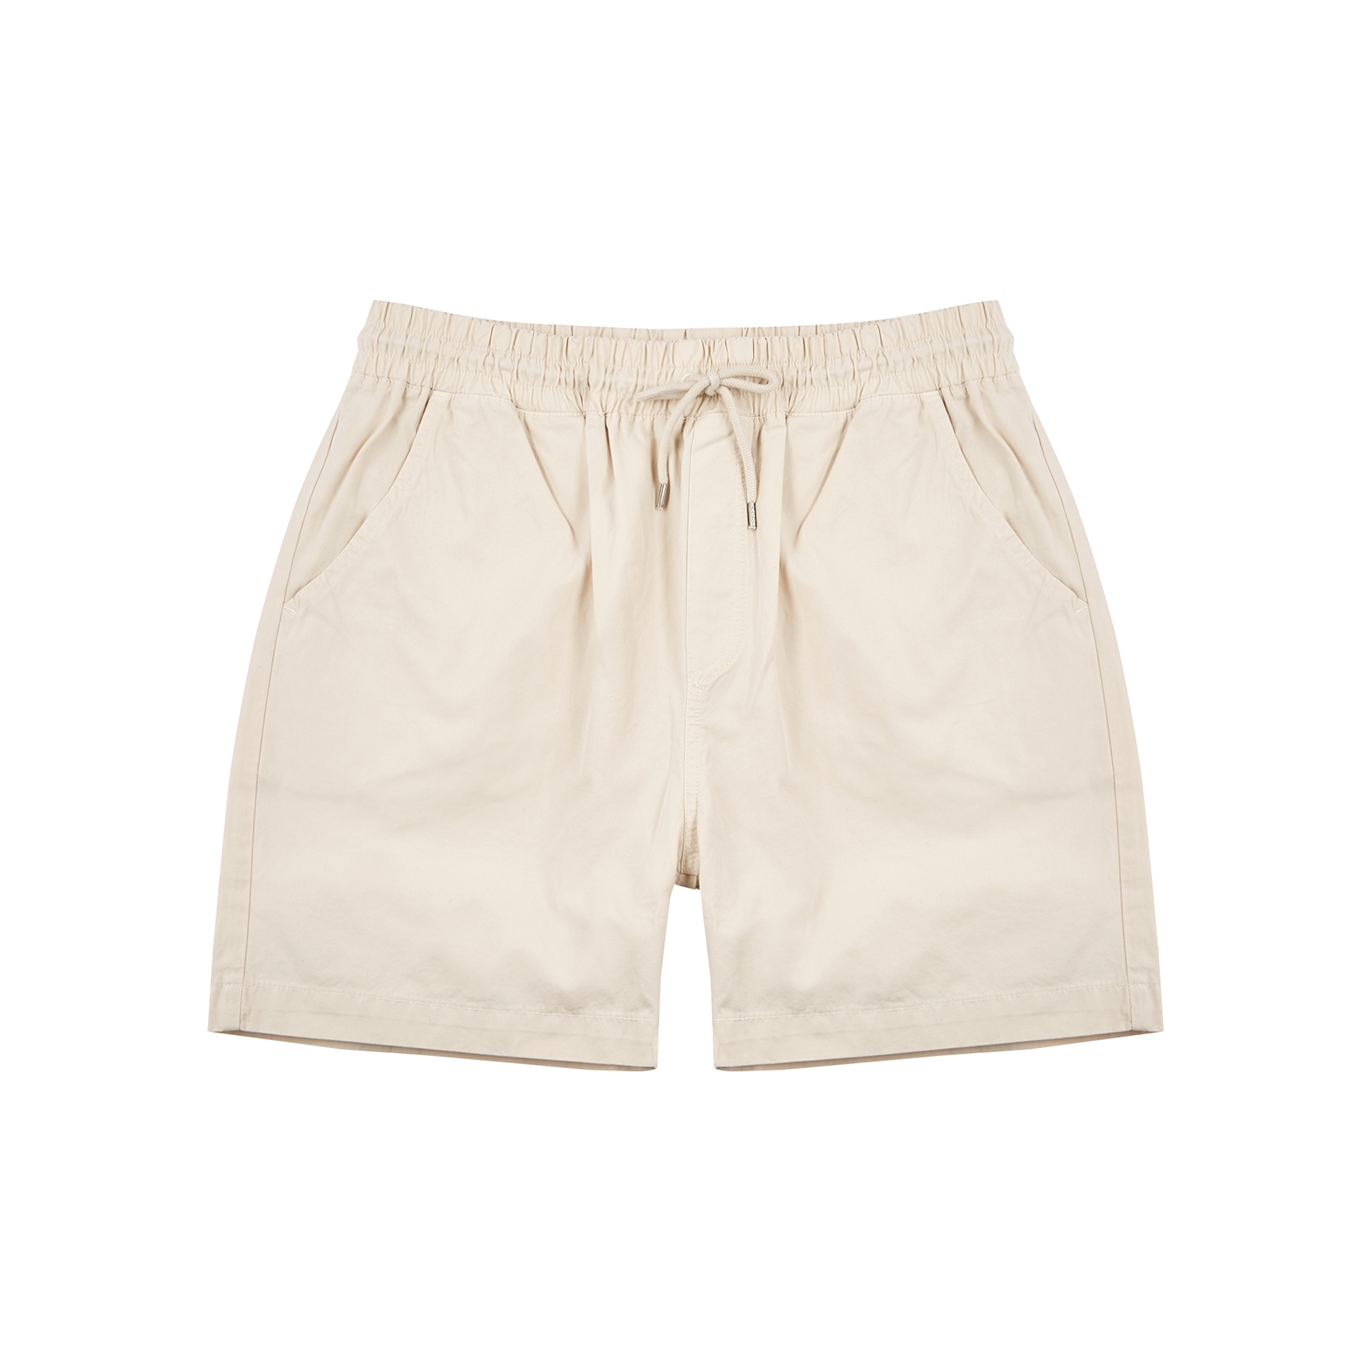 Colorful Standard Cotton Shorts - Off White - S